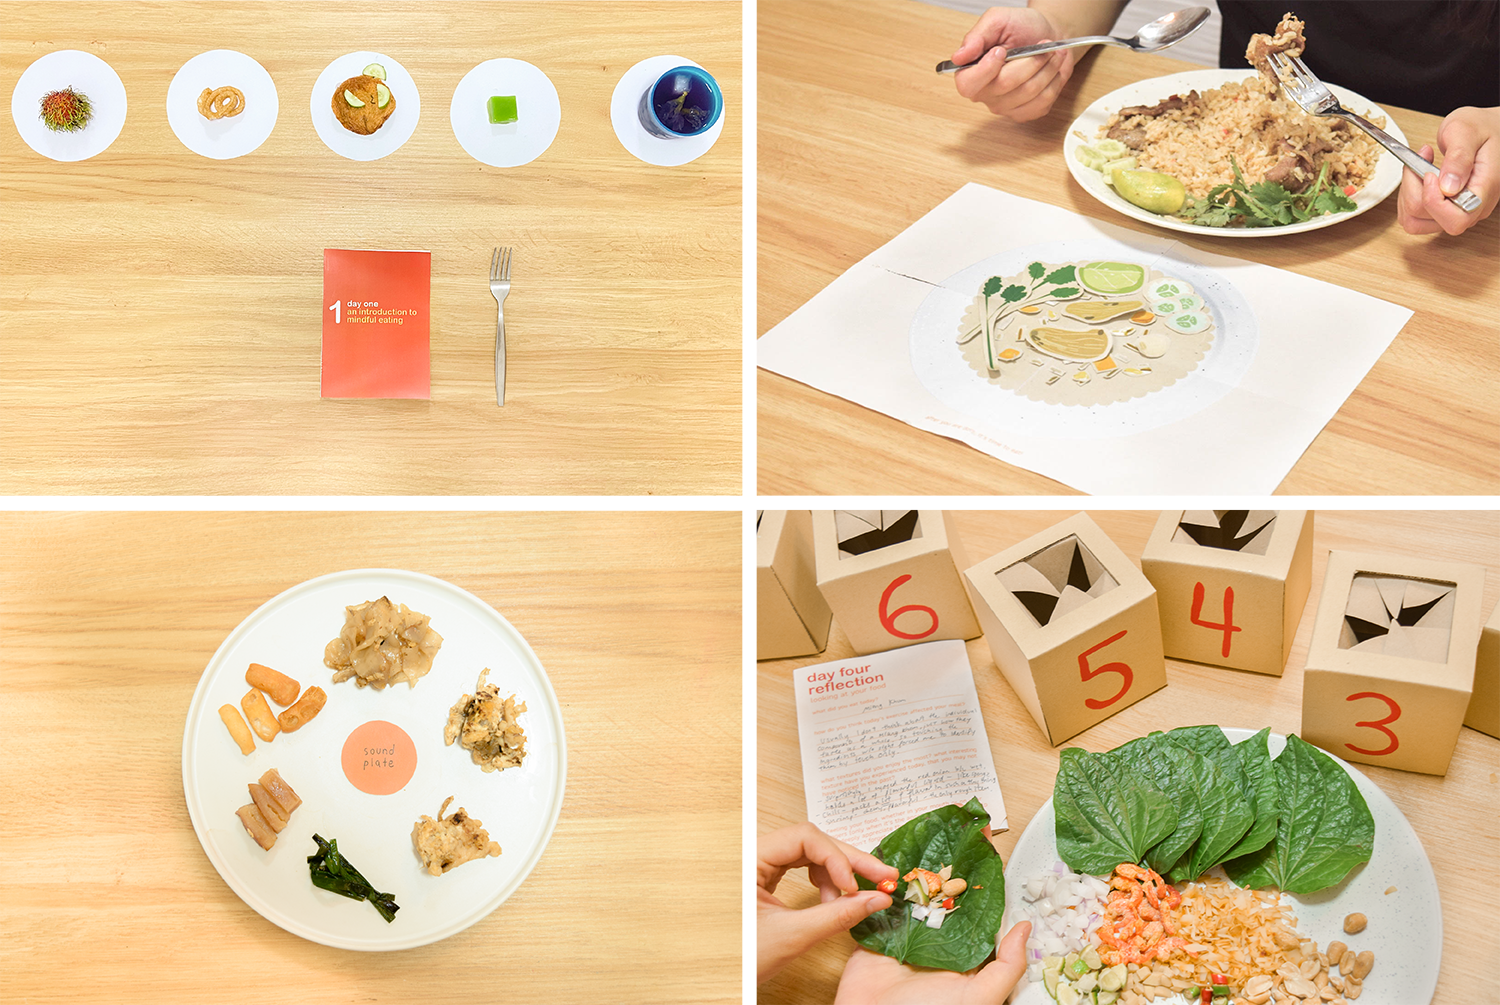  Top left: a set up of Day 1, An Introduction to Mindful Eating. Top right: Activity on Day 2, Let’s Take a Look. Bottom left: Sound Plate used on Day 3. Bottom right: Mock up of boxes containing ingredients for participants to touch, along with the 